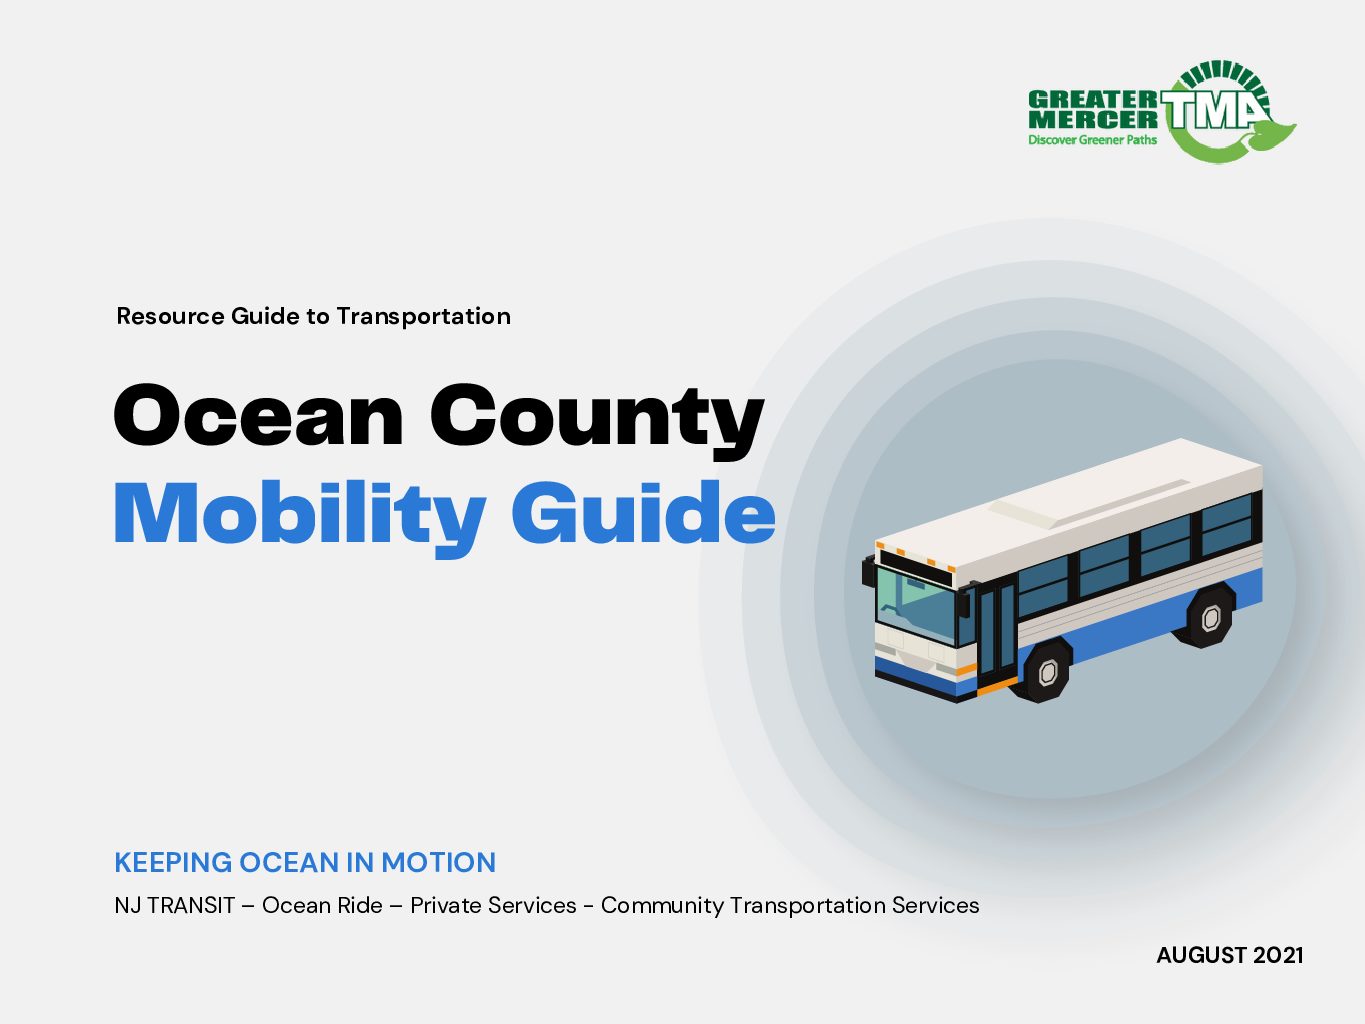 ocean-county-mobility-guide-oct21